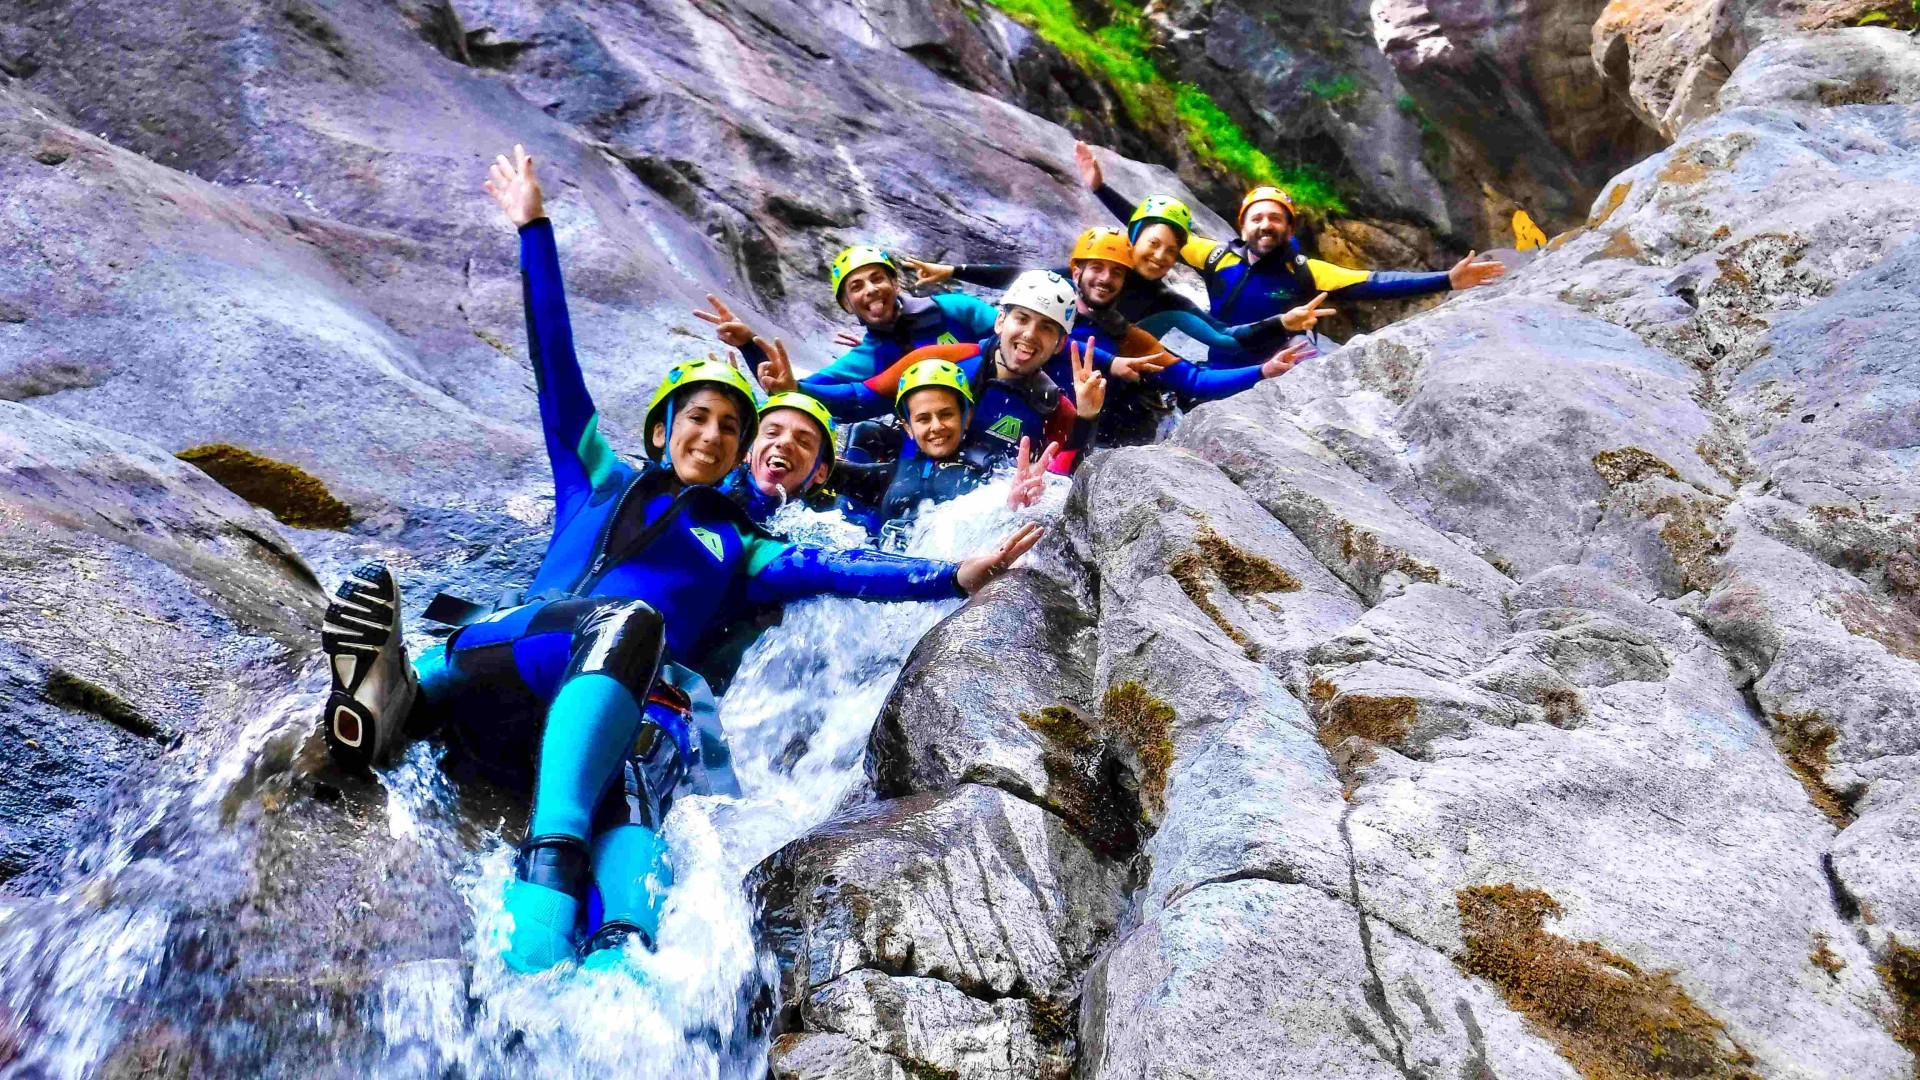 Canyoning: experience the sporting spirit in the Chalamy stream in Champdepraz